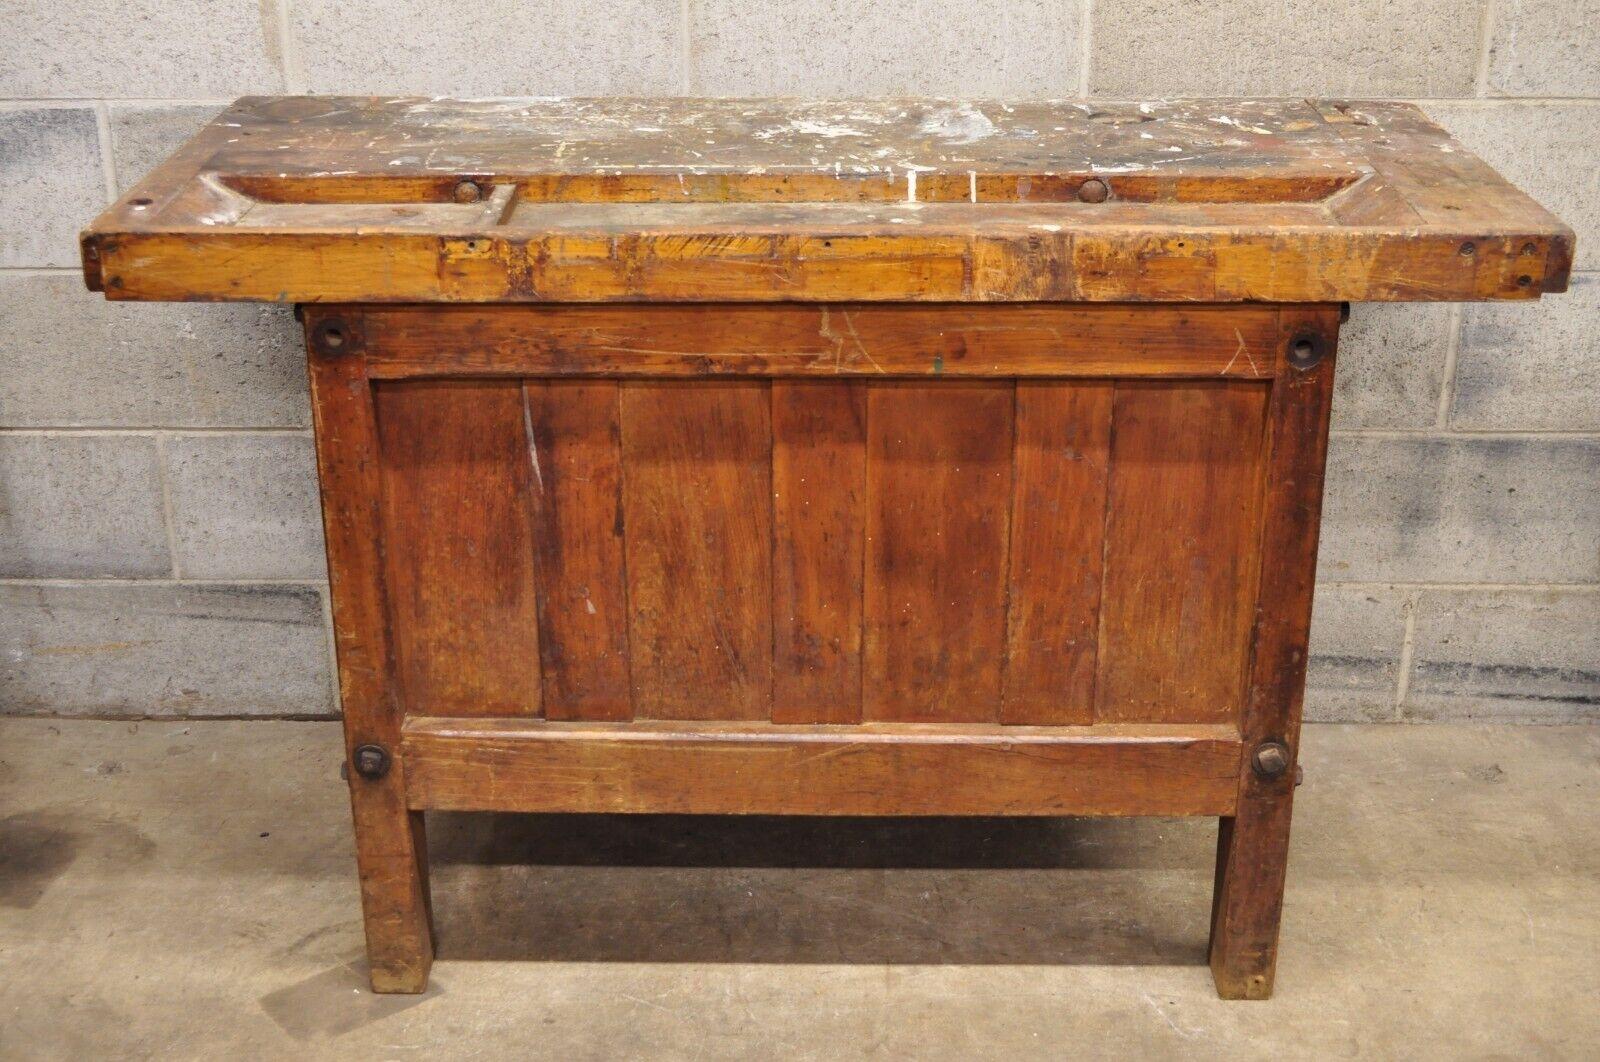 Antique American Industrial Wood Plank Distress Paint Splatter Work Bench Table For Sale 3